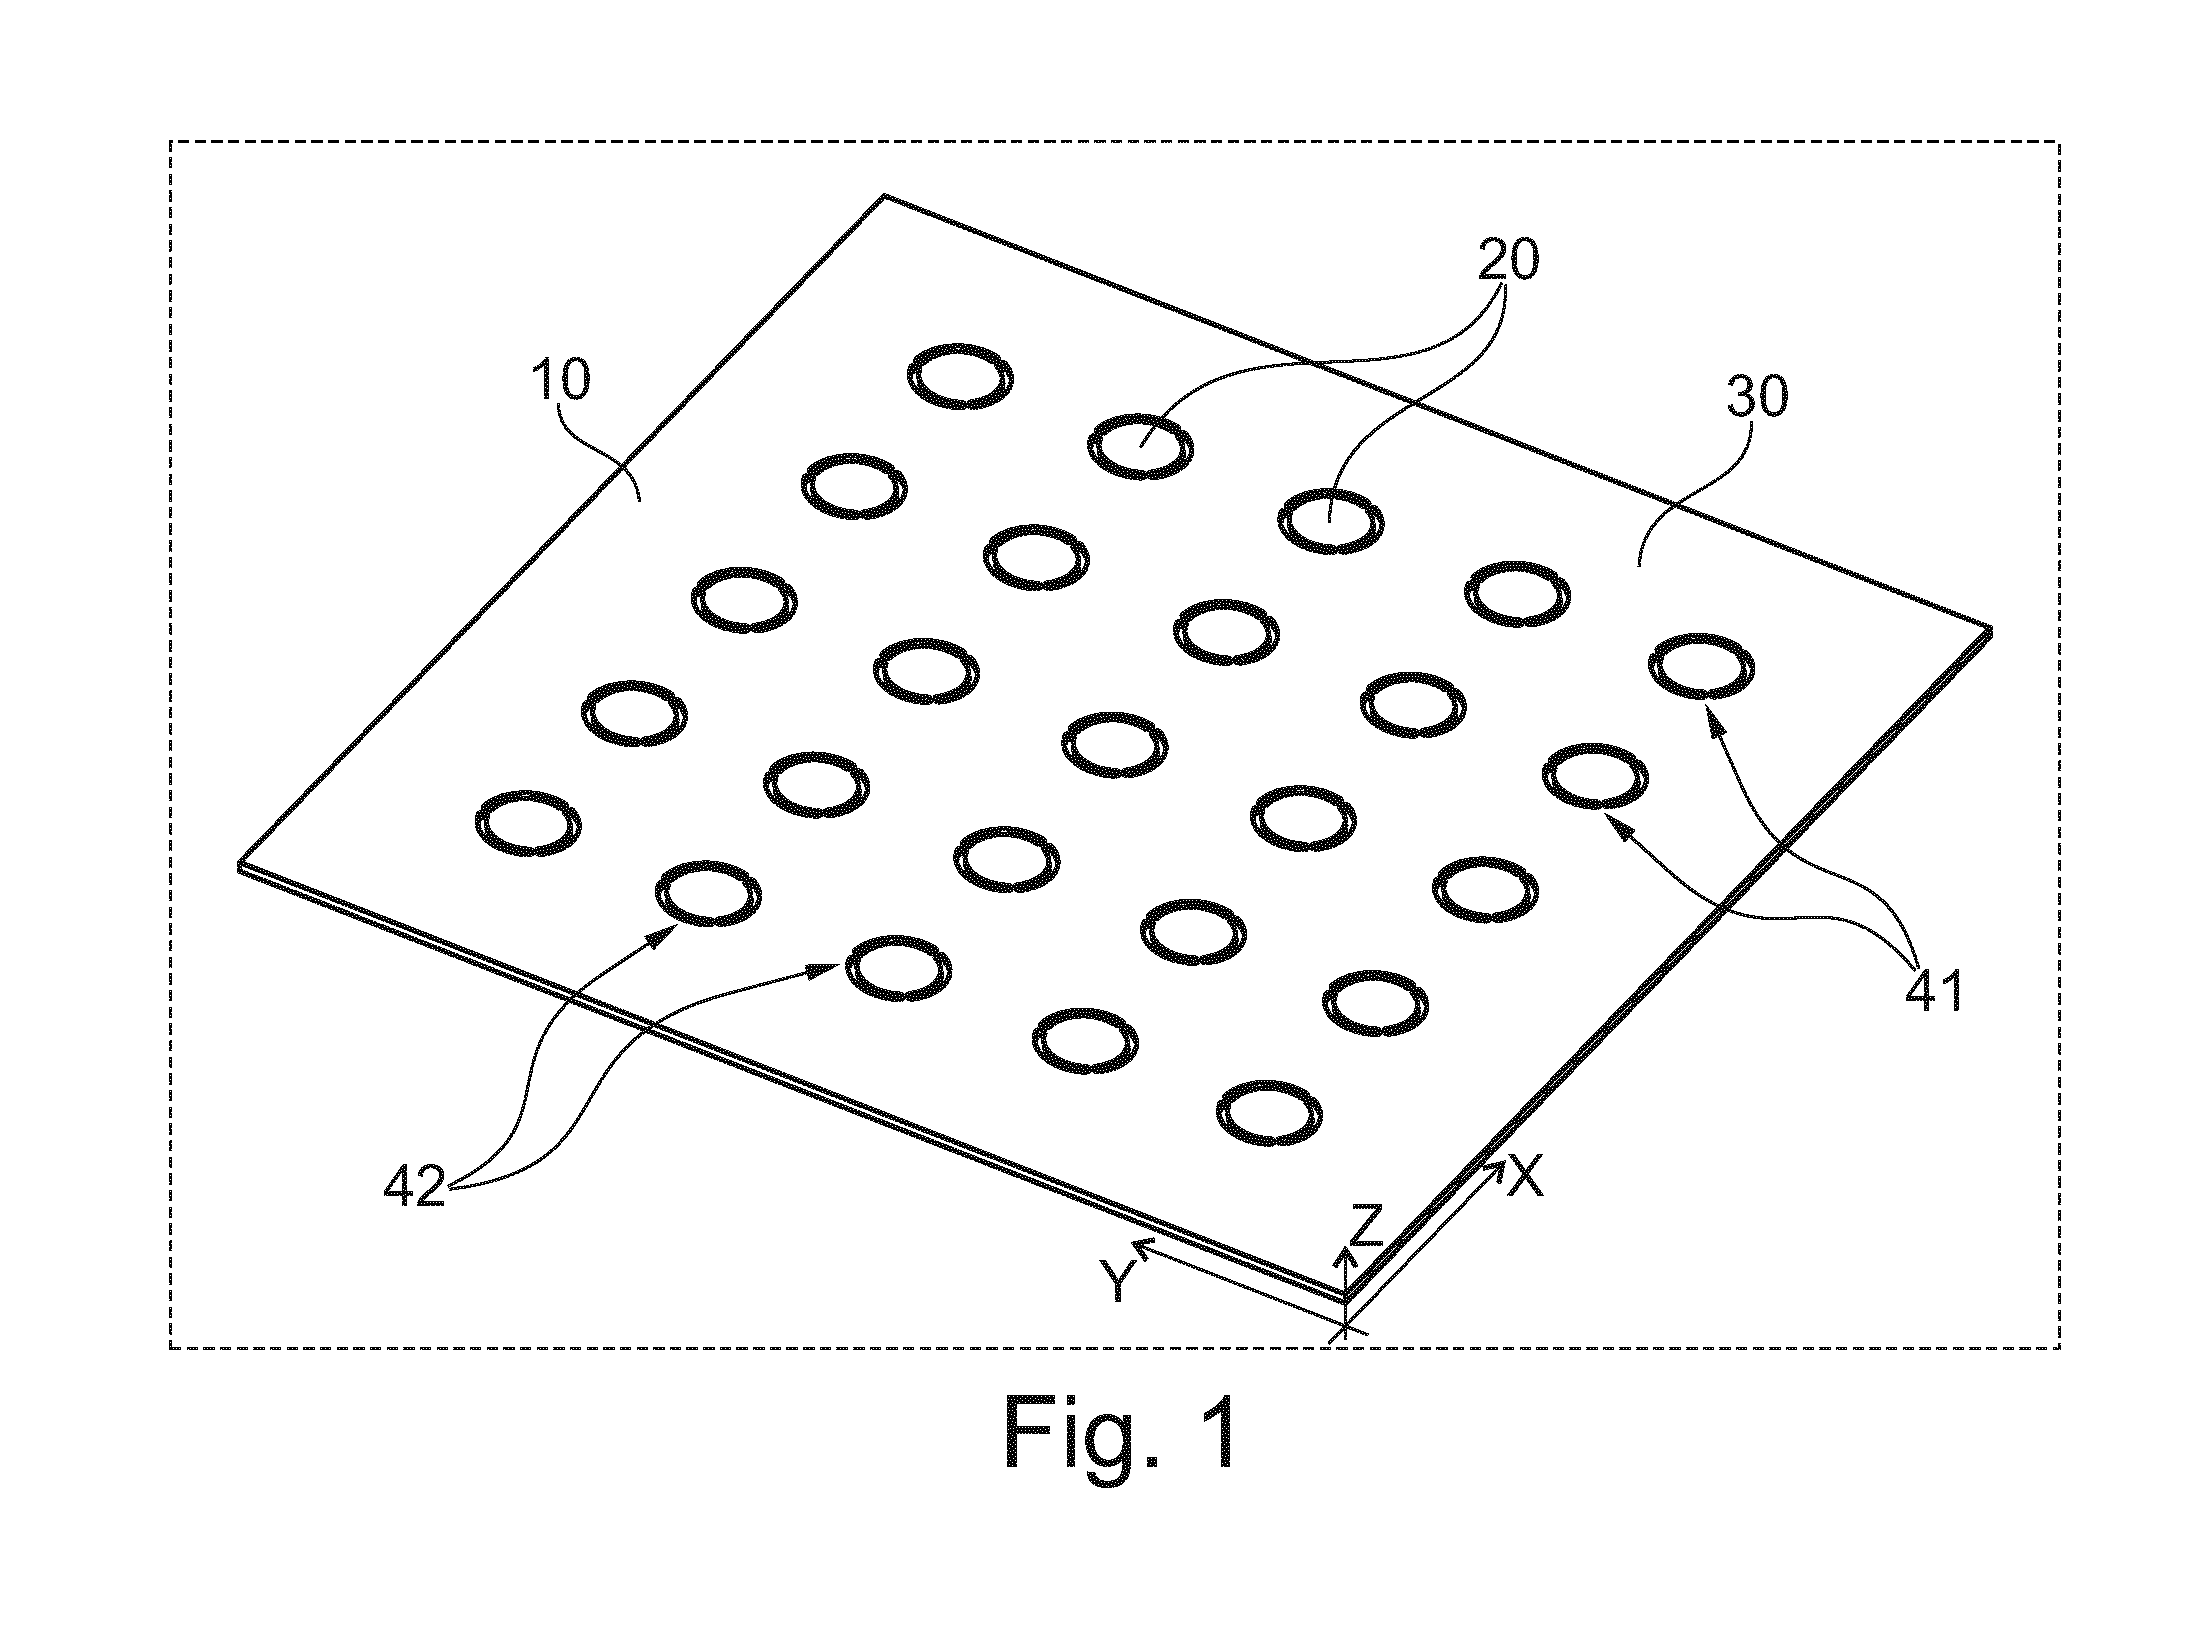 Integrated polymer foil, patch-clamp array and membrane valves